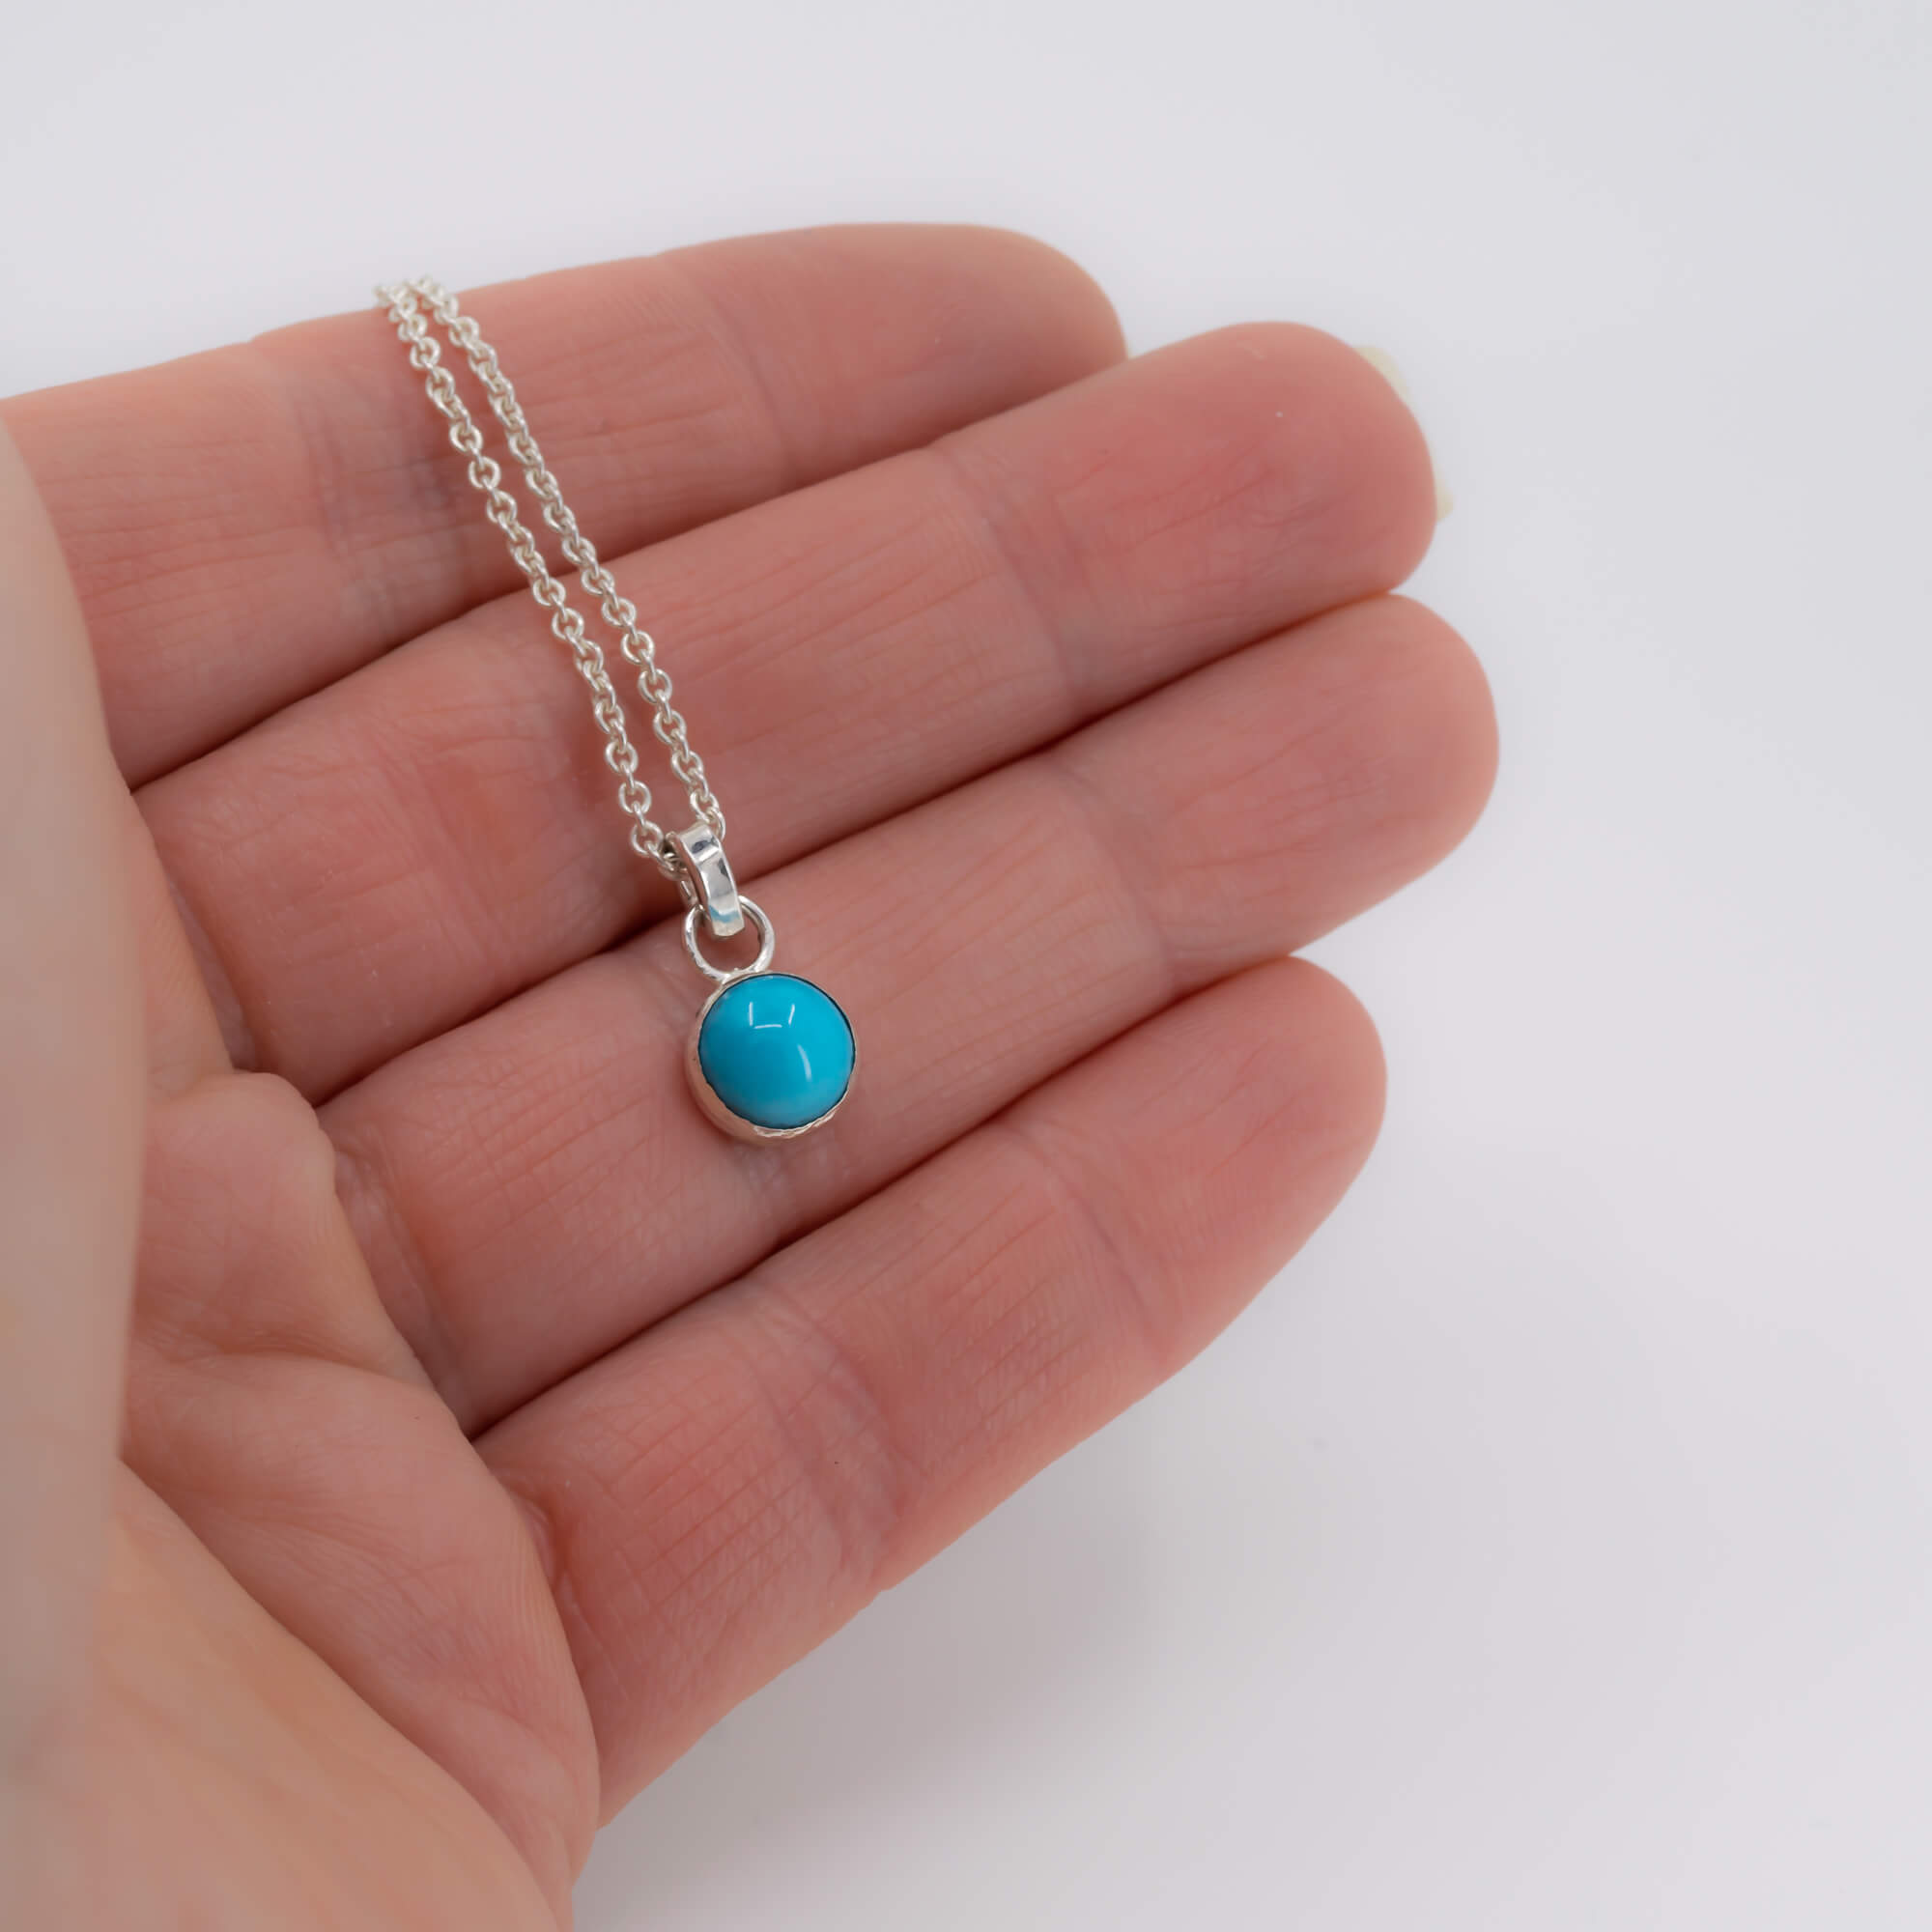 Dainty Round Sleeping beauty turquoise minimalist sterling silver pendant necklace shown in hand for scale